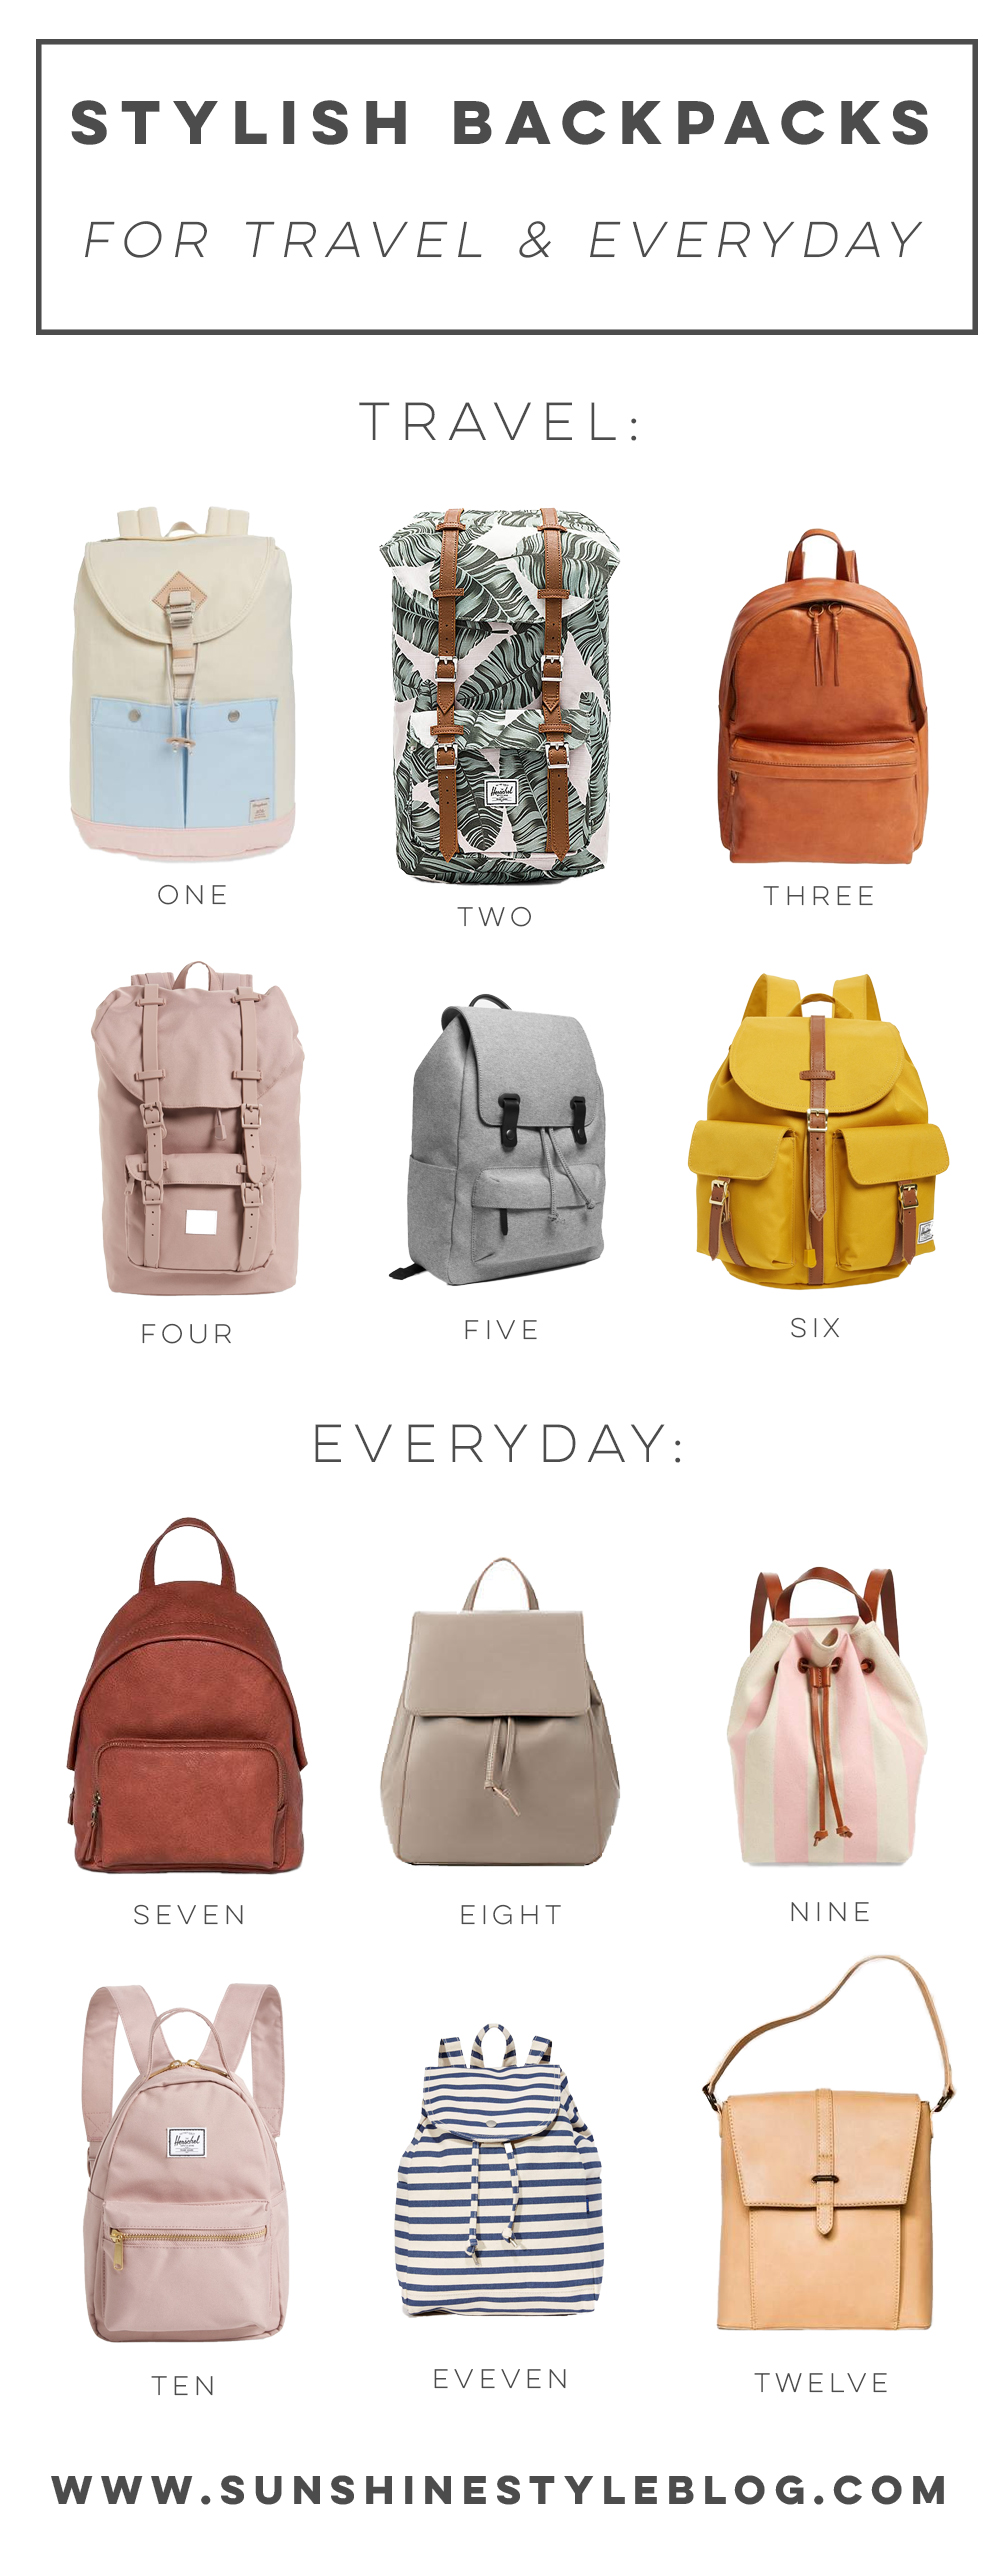 12 Stylish Backpacks for Travel and Everyday - Includes My Fav Backpack Brands from Herschel, Target, ShopBop, and Everlane